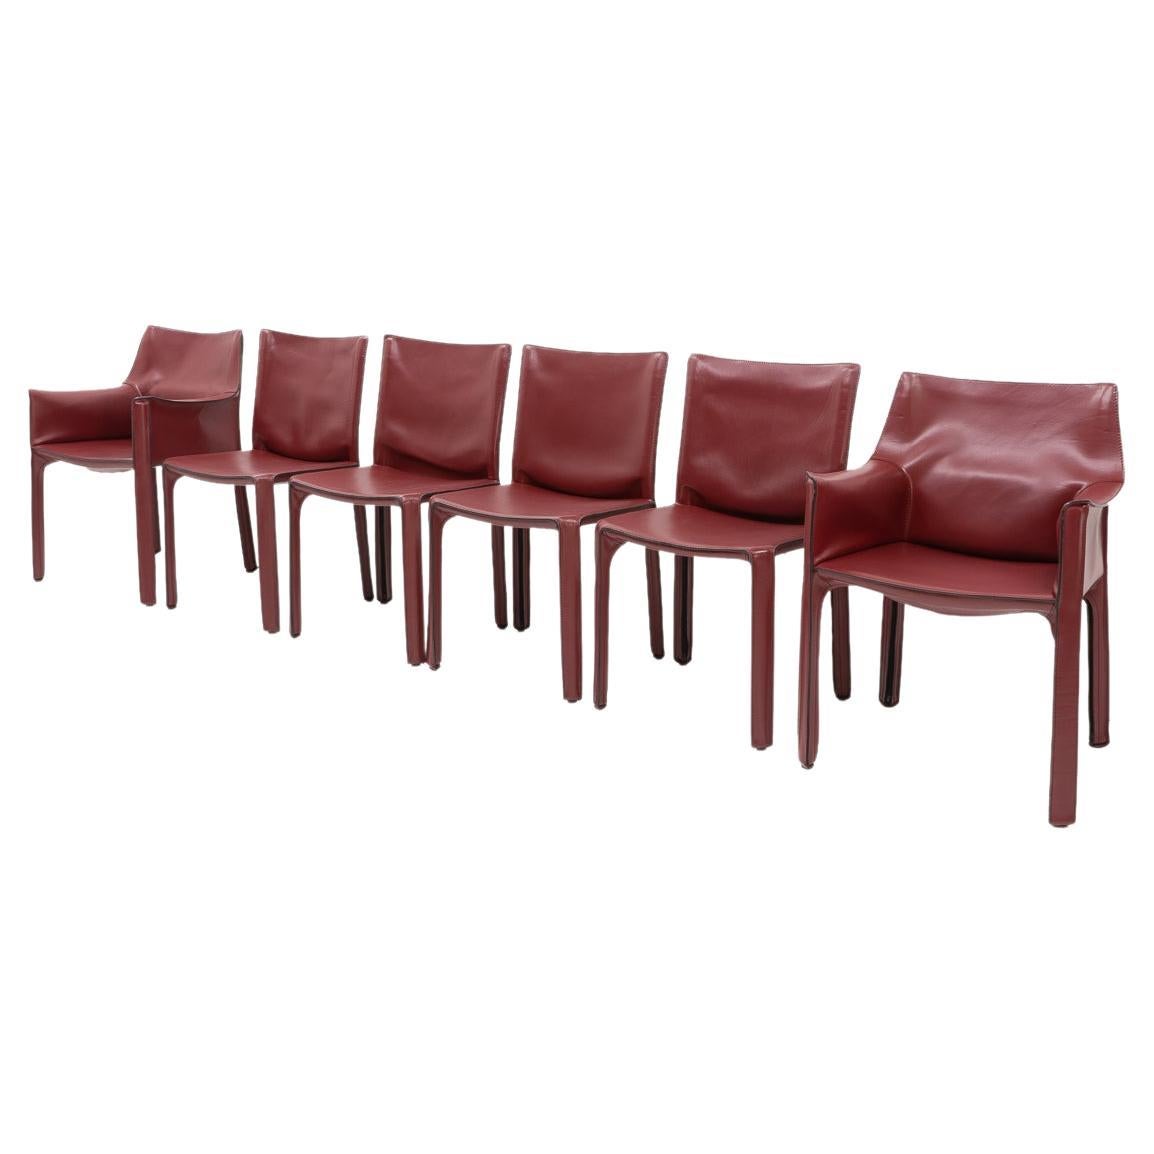 Italian Design Classics, Cab Chairs by Mario Bellini for Cassina, Set of 6 For Sale